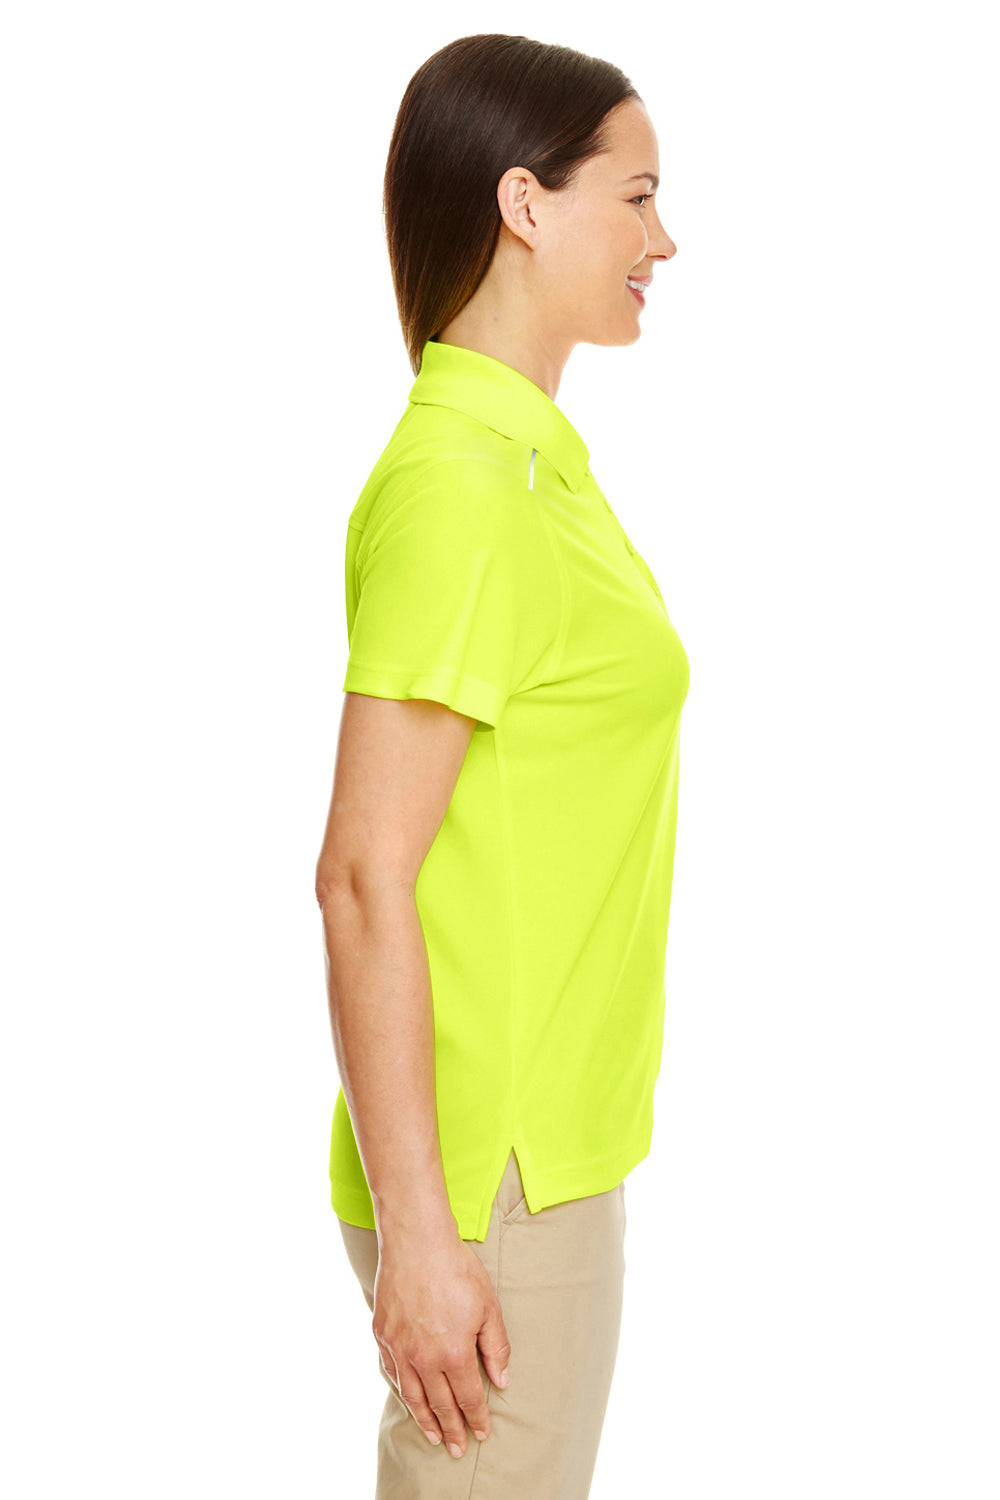 Core 365 78181R Womens Radiant Performance Moisture Wicking Short Sleeve Polo Shirt Safety Yellow Side